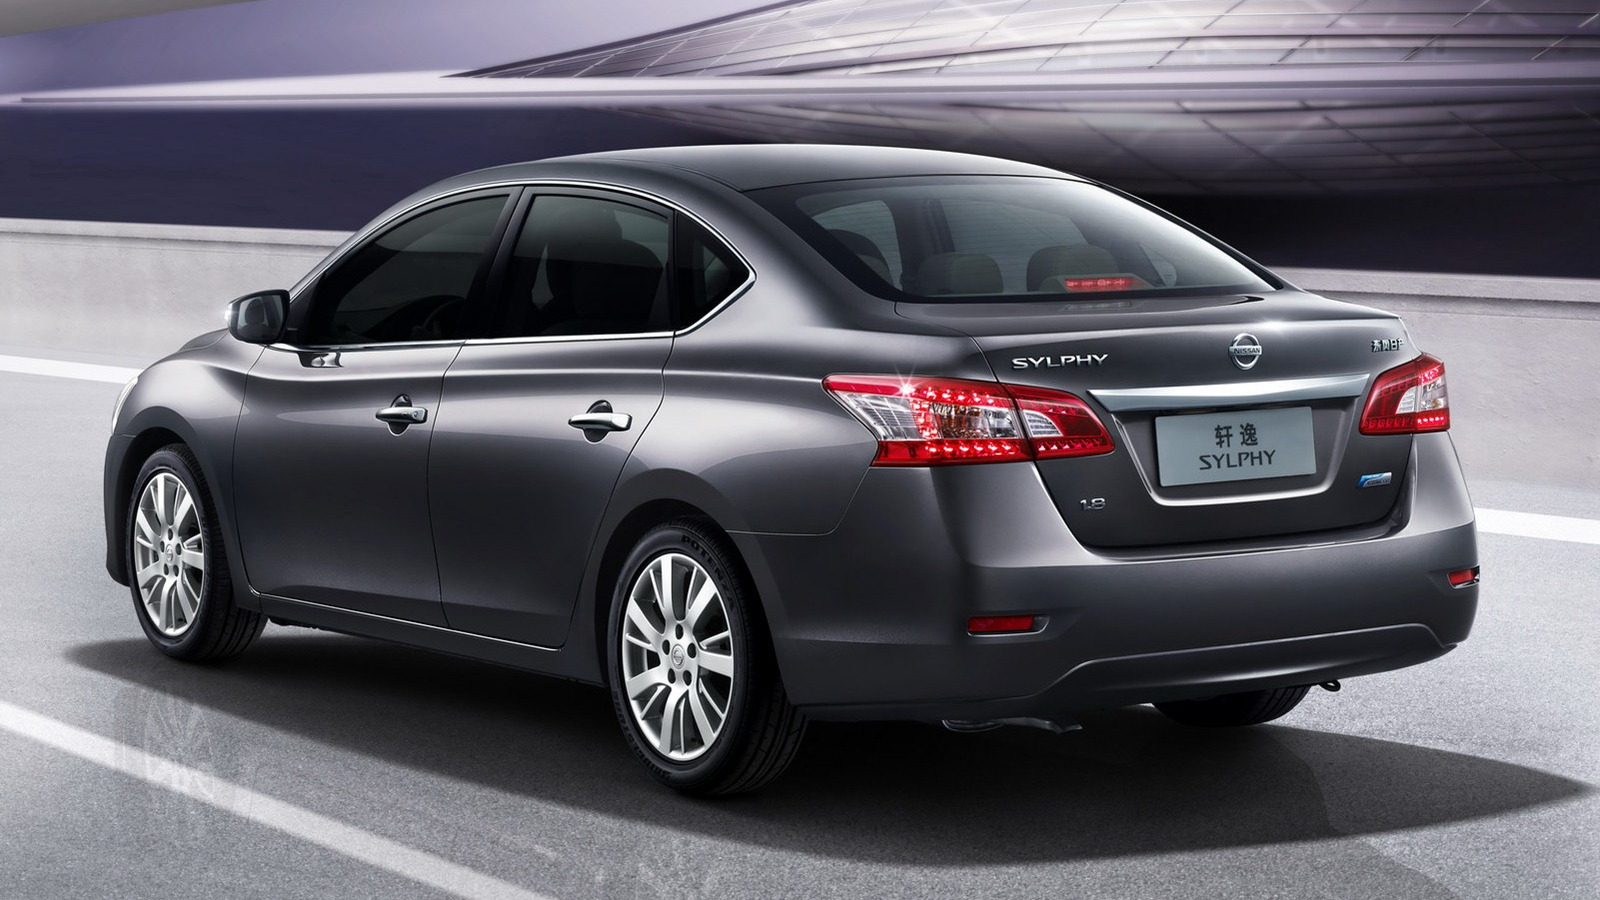 2013 Nissan Sylphy, Beijing Auto Show